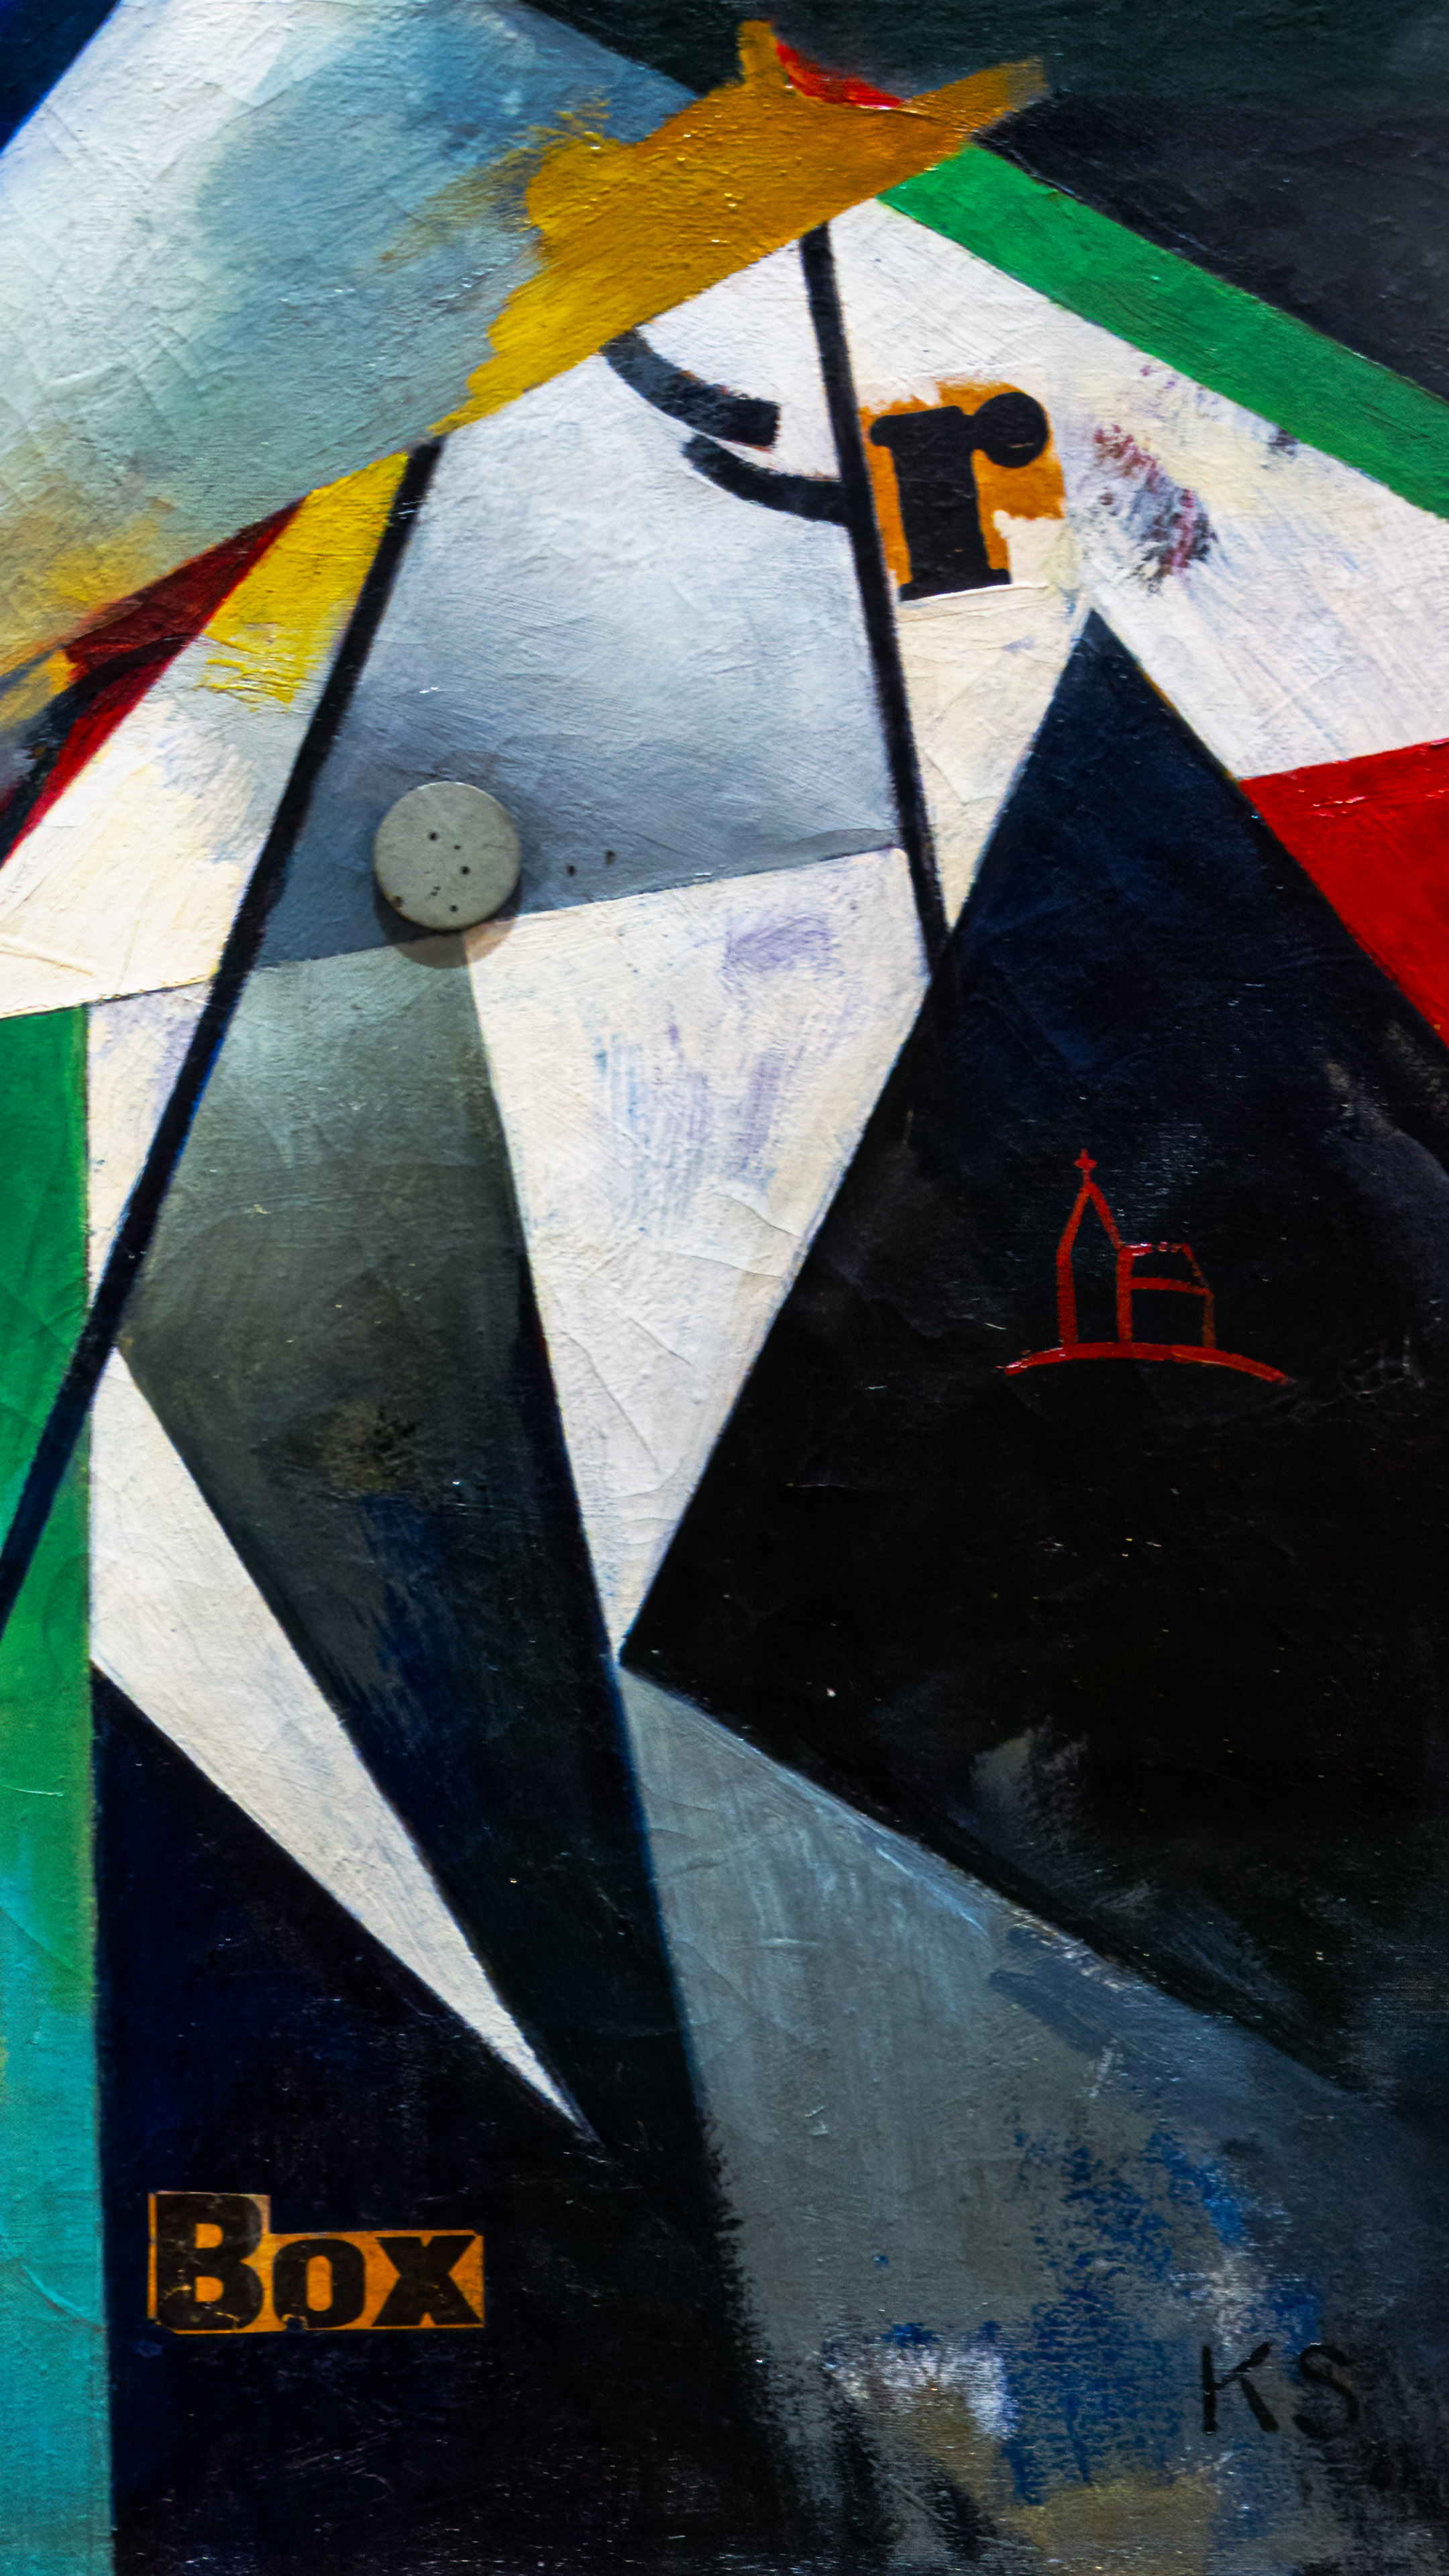 Immerse yourself in the abstract brilliance of Kandinsky's art through our phone wallpapers in HD.